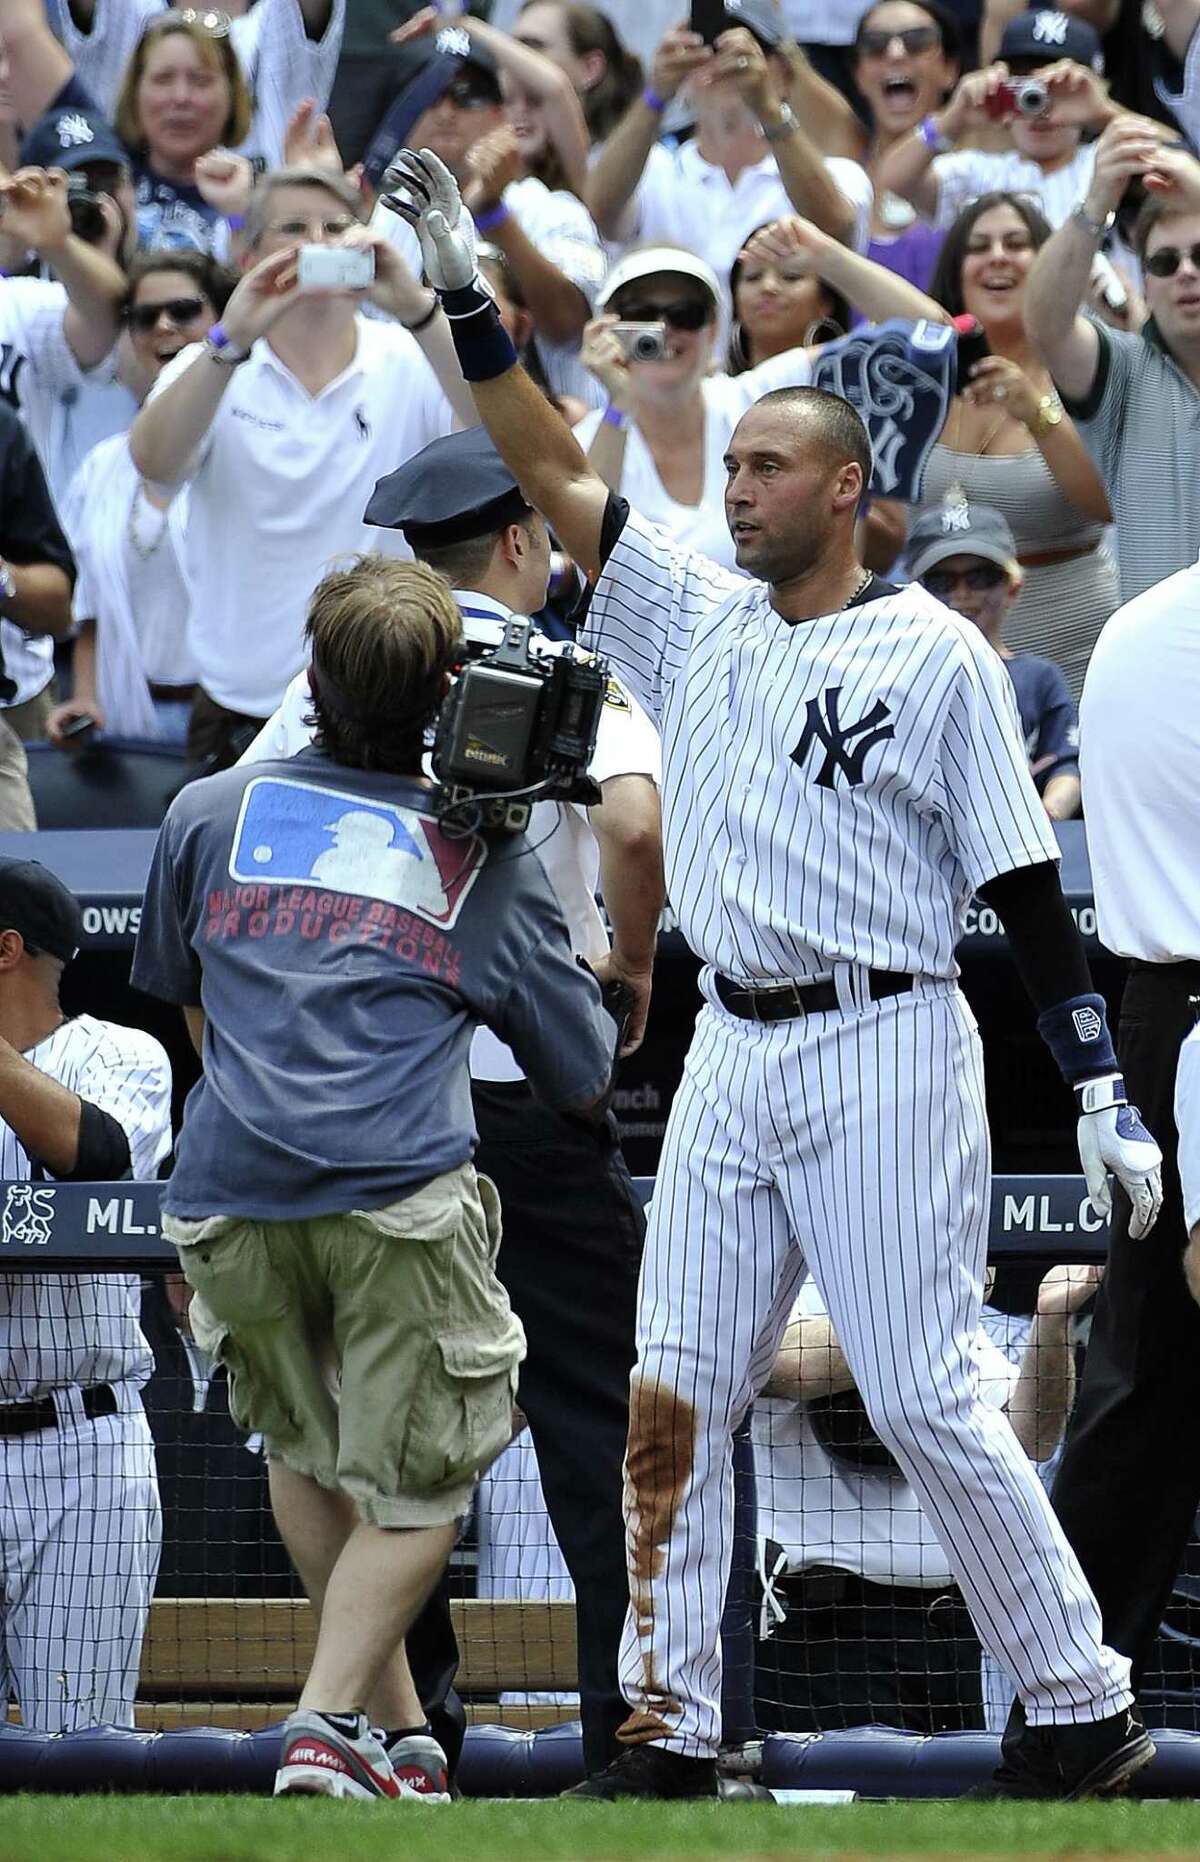 Reaction to Derek Jeter becoming the 1st Yankee to reach 3,000 hits